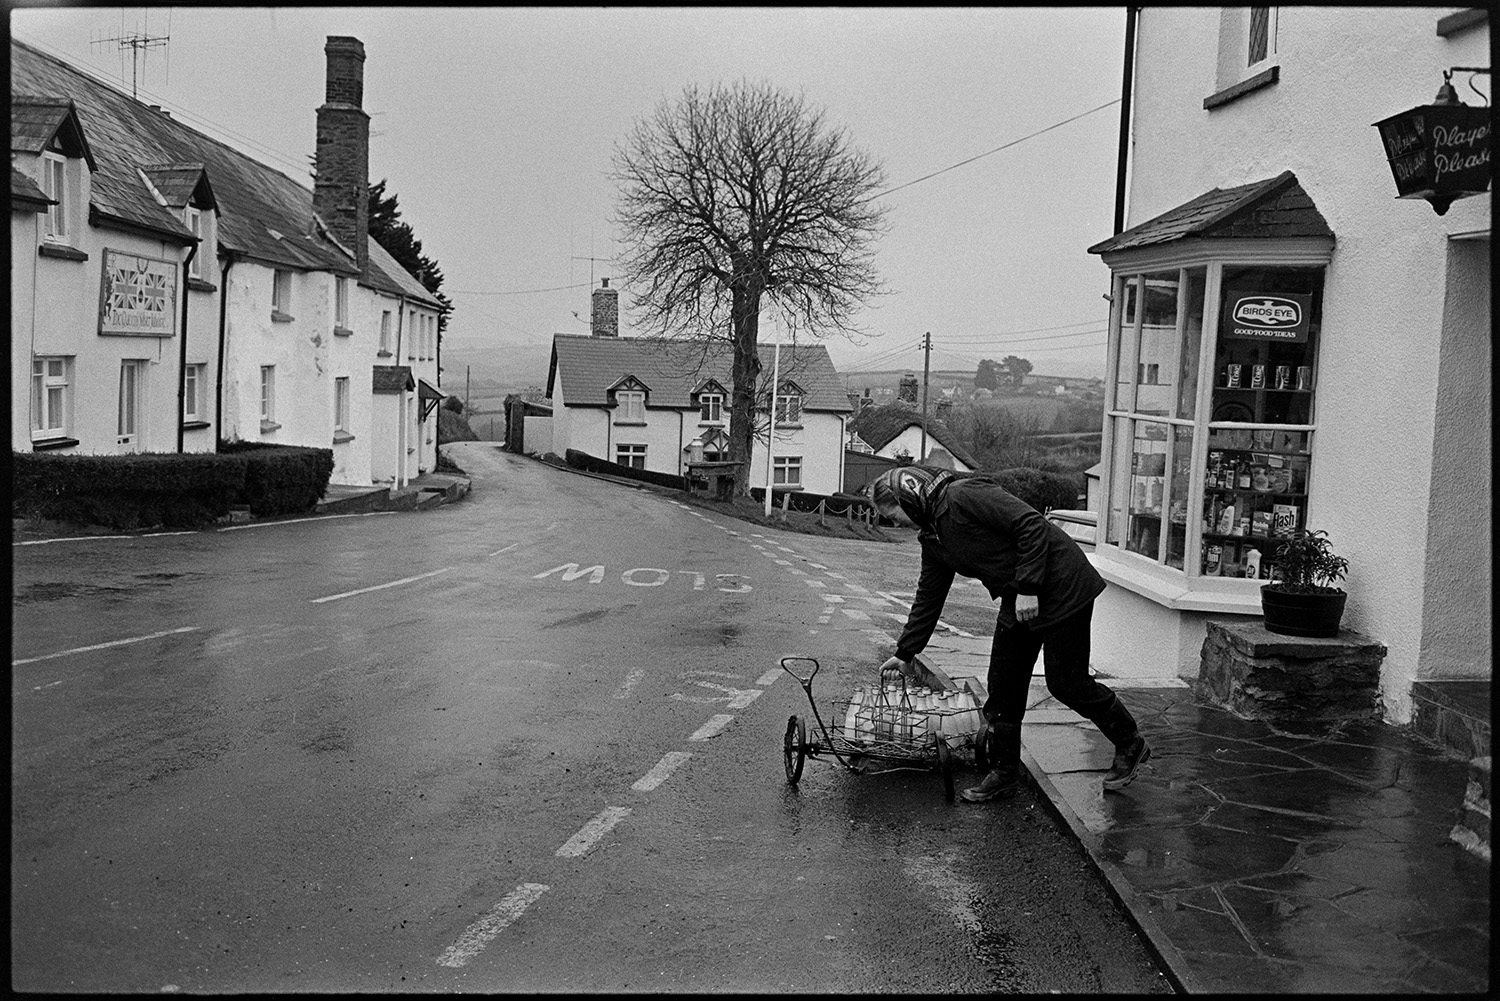 Woman doing milk round in village, chatting to customers. <br />
[Jane Woolacott delivering milk to a shop in Atherington. She is transporting the milk bottles in a trolley. On the opposite side of the road a house has a decoration up for the Silver Jubilee of Queen Elizabeth II.]